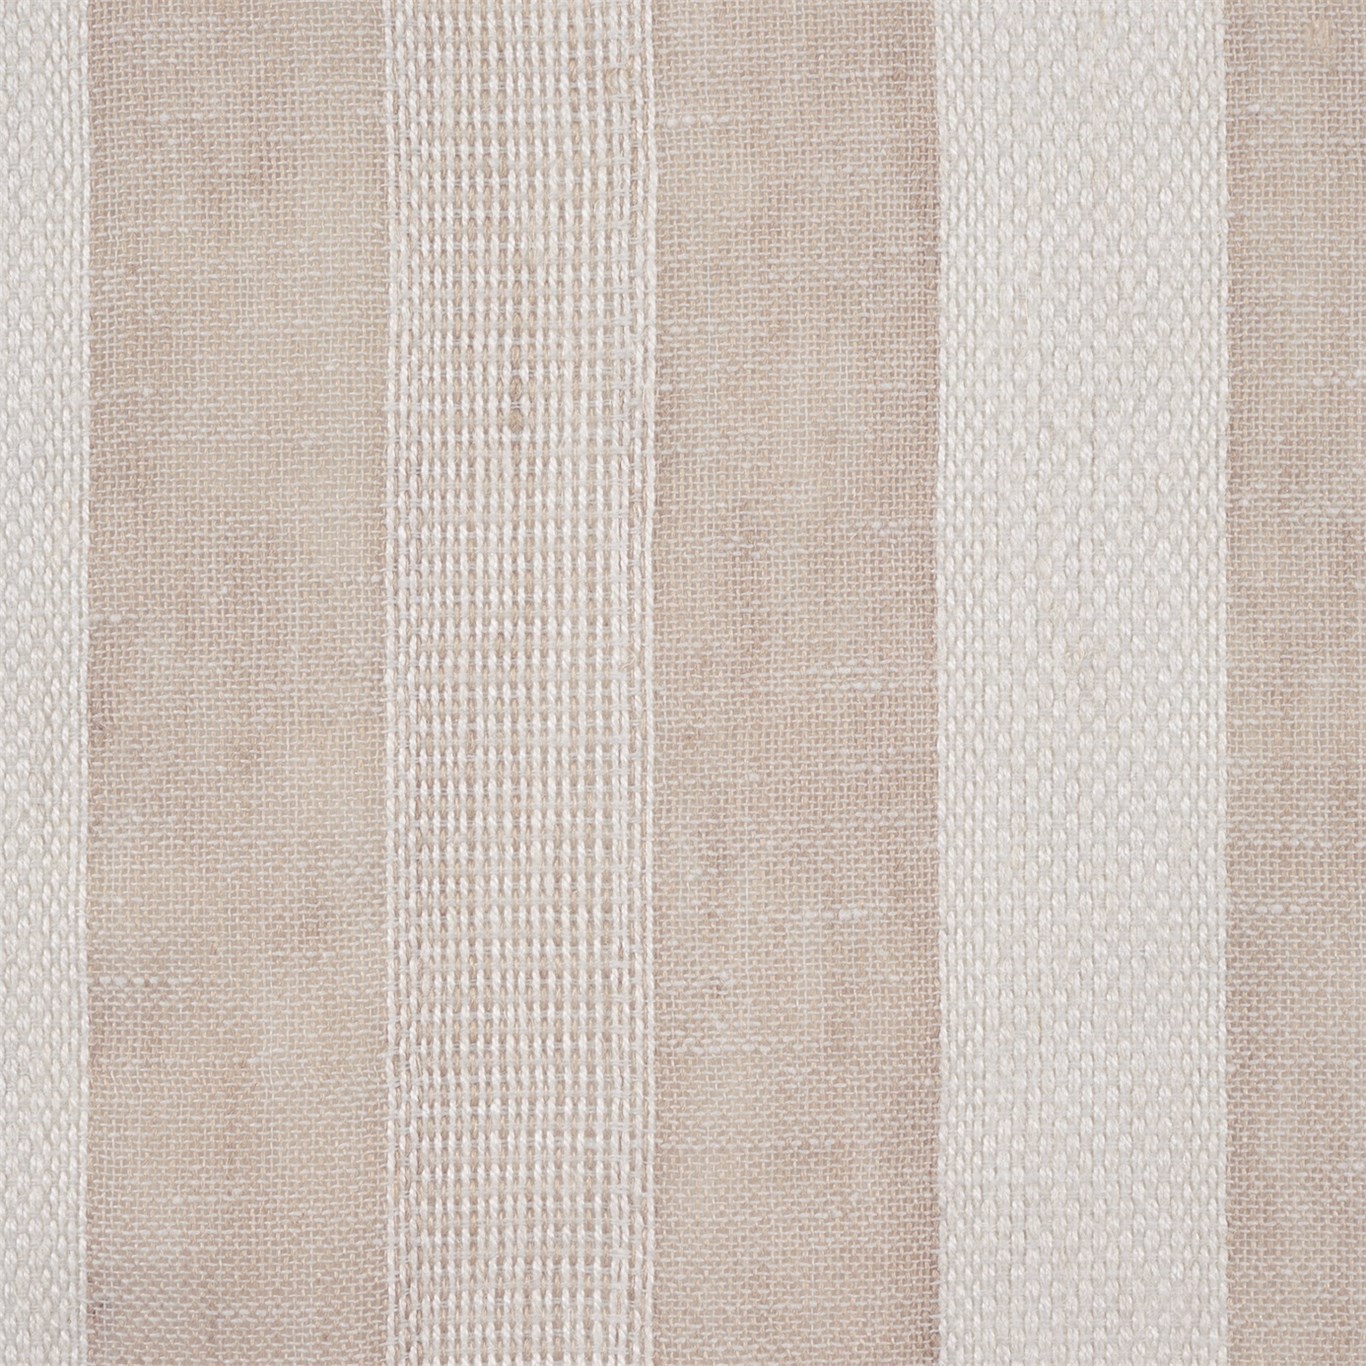 Purity Voiles Latte/Ecru Fabric by HAR